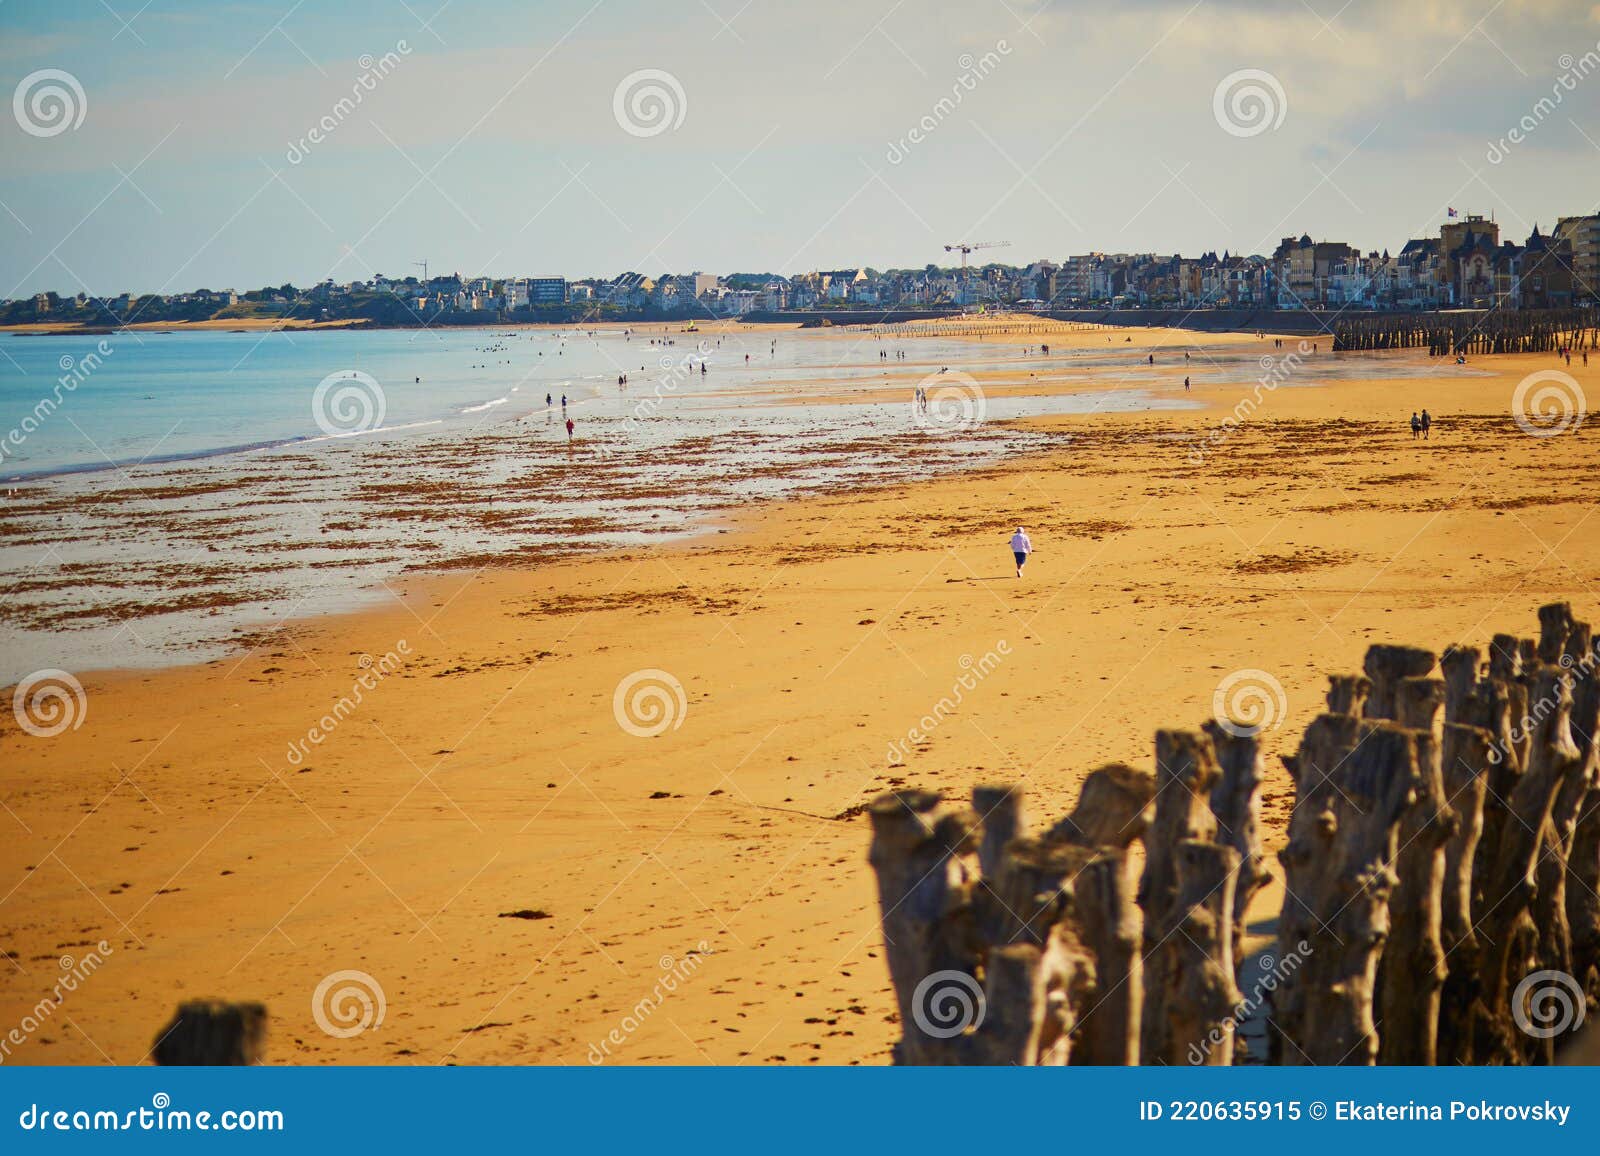 scenic view of plage du sillon beach in saint-malo, brittany, france